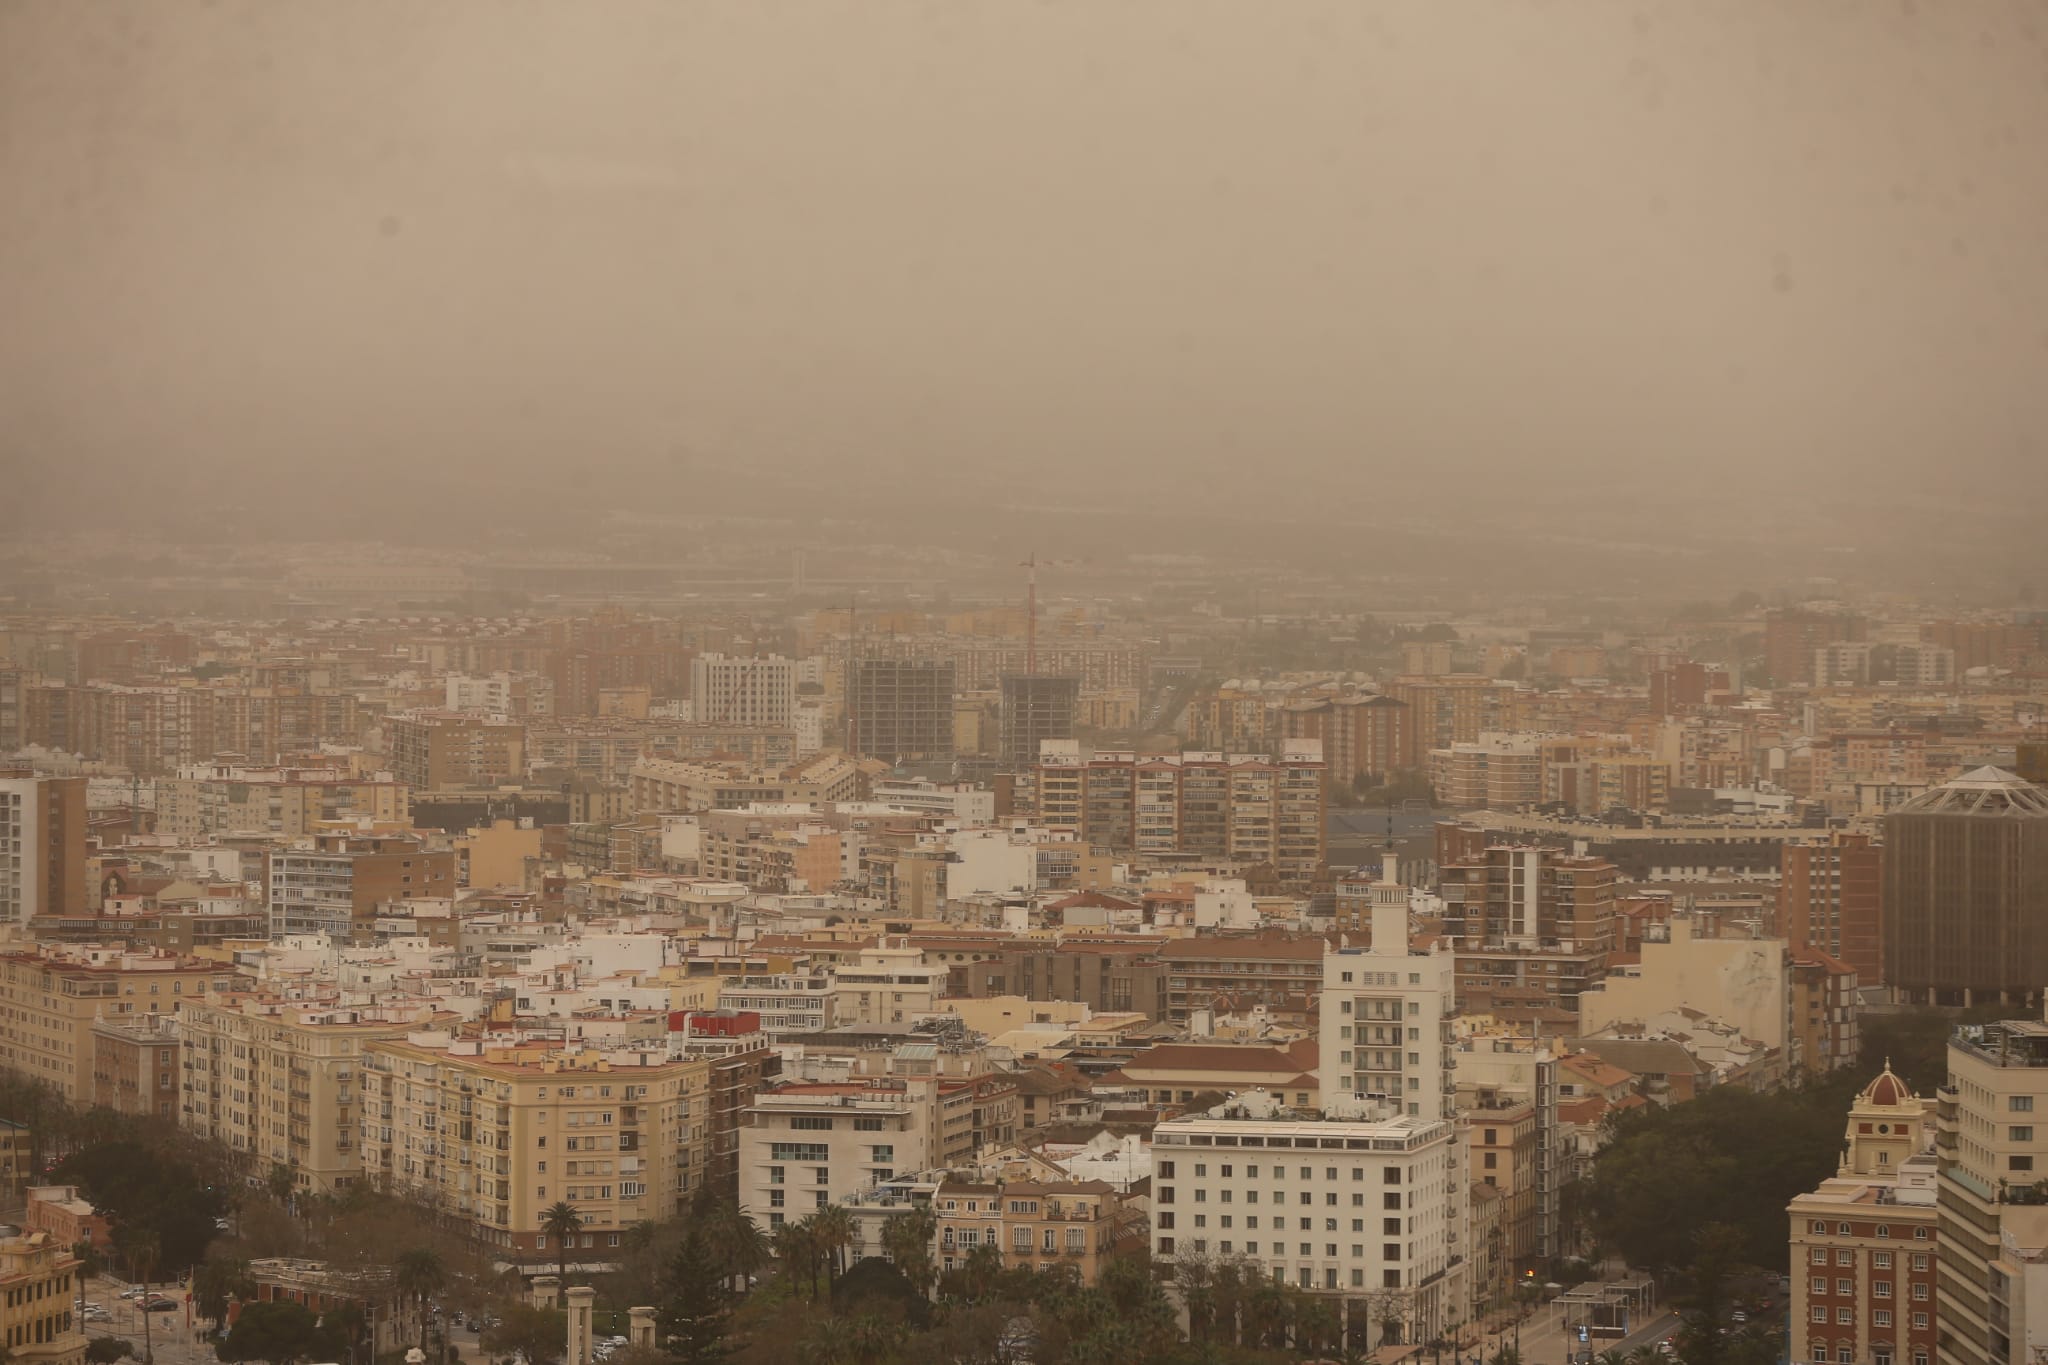 The rain brought with it Saharan dust, in suspension